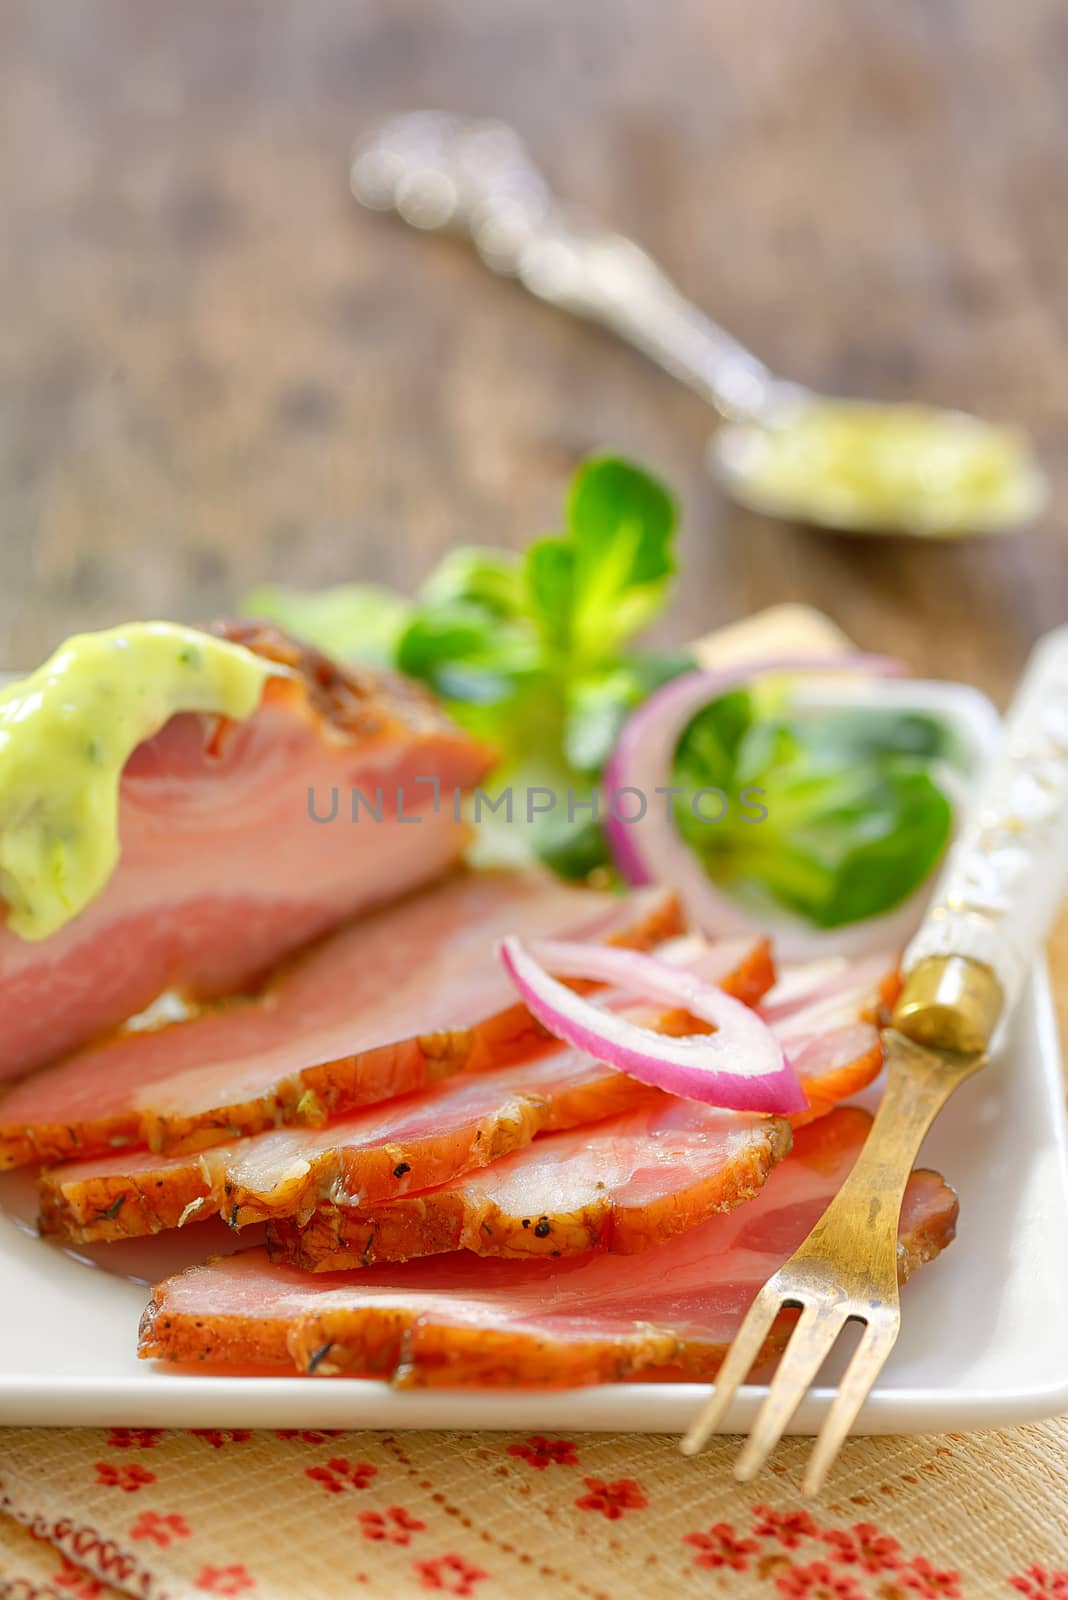 smoked bacon and vegetables on wooden table